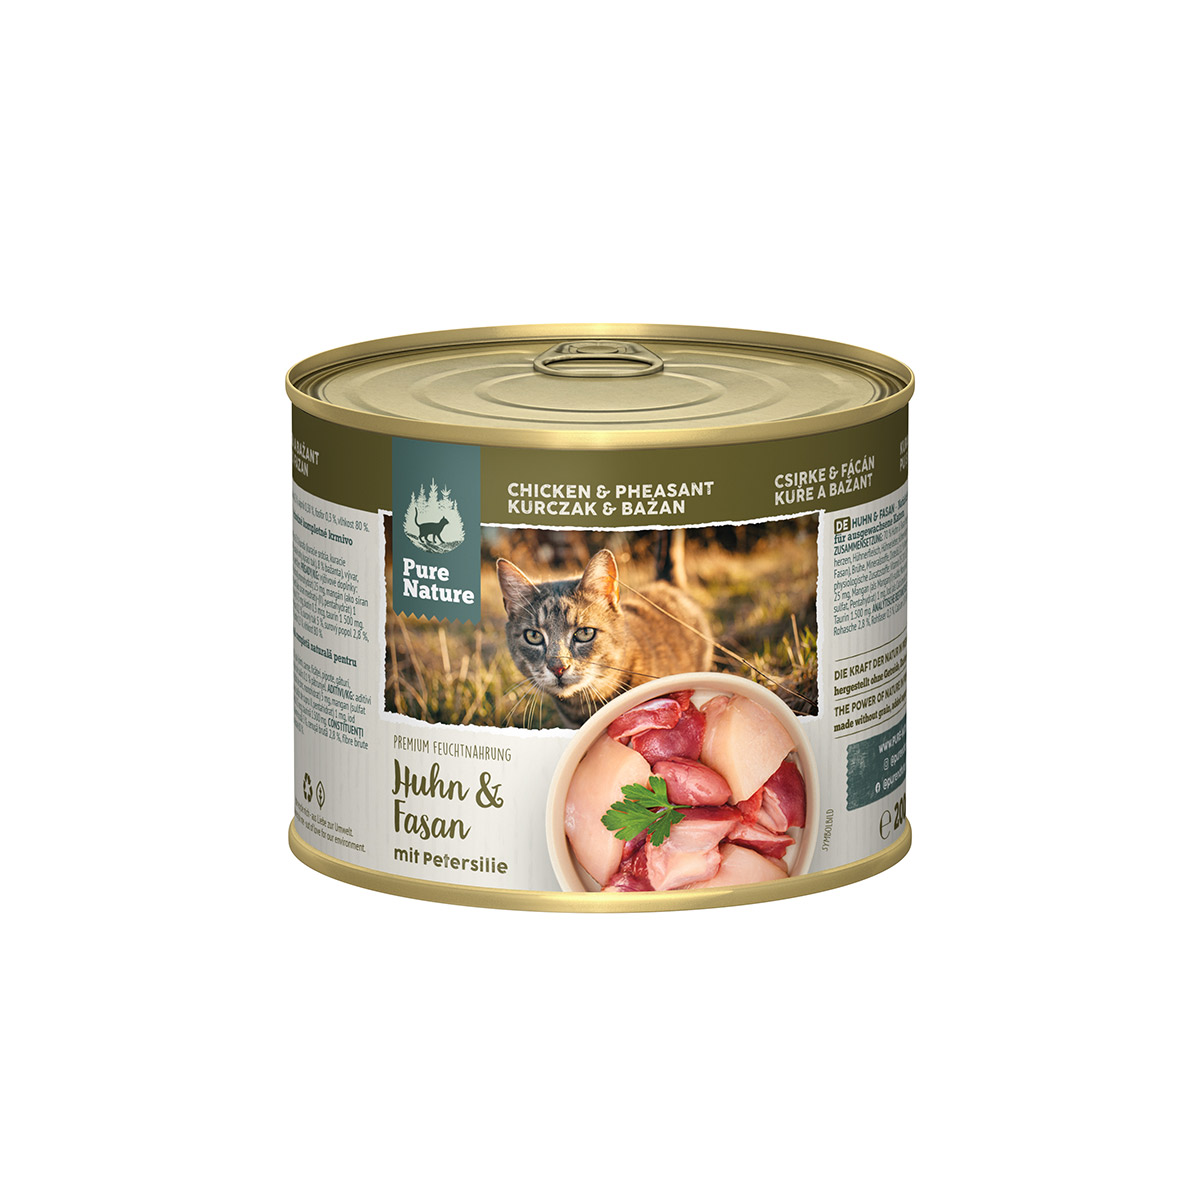 Pure Nature ADULT Huhn & Fasan mit Petersilie 6x200g